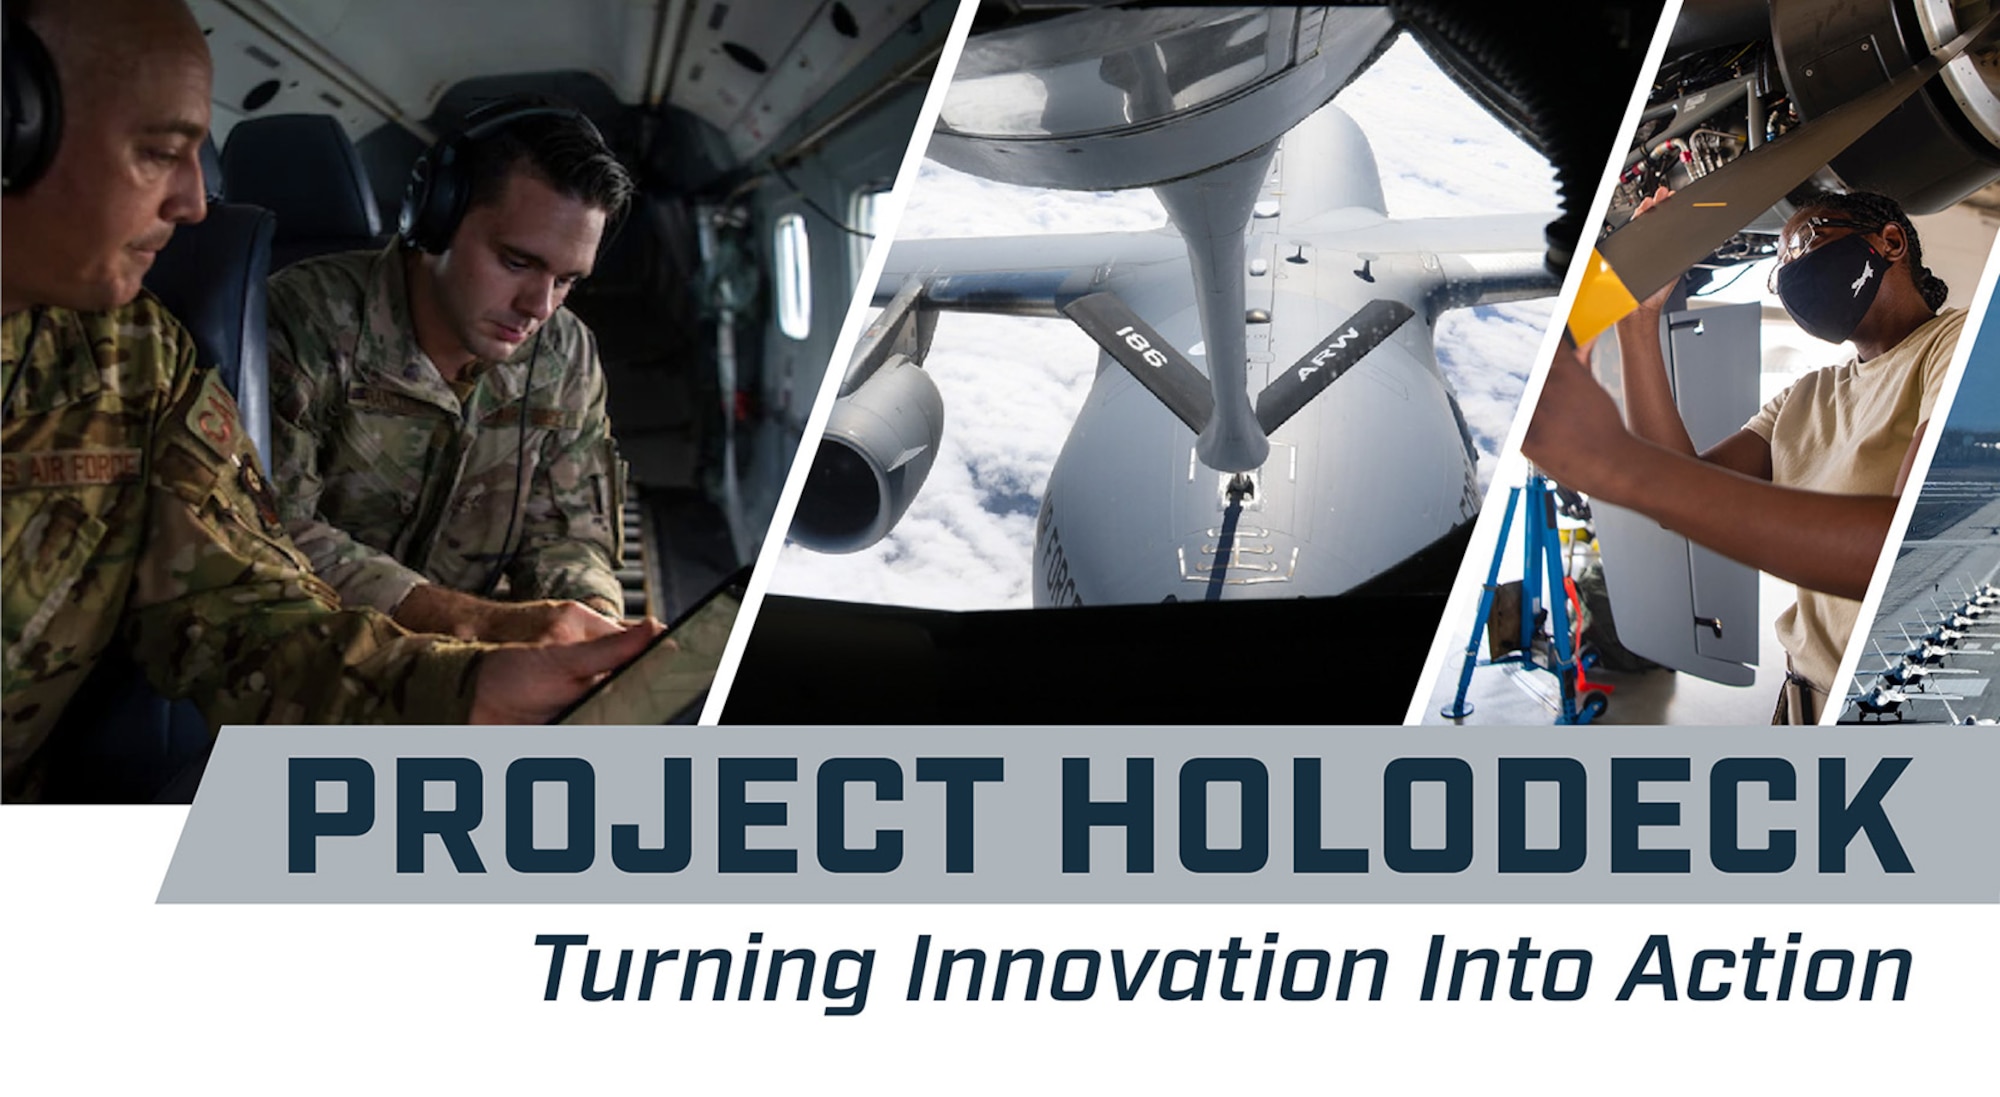 The Office of the Vice Chief of Staff of the Air Force recently partnered with Productable Inc. to develop an innovation management platform that allows the Air Force to align the right people, processes and funding to drive innovation at scale.